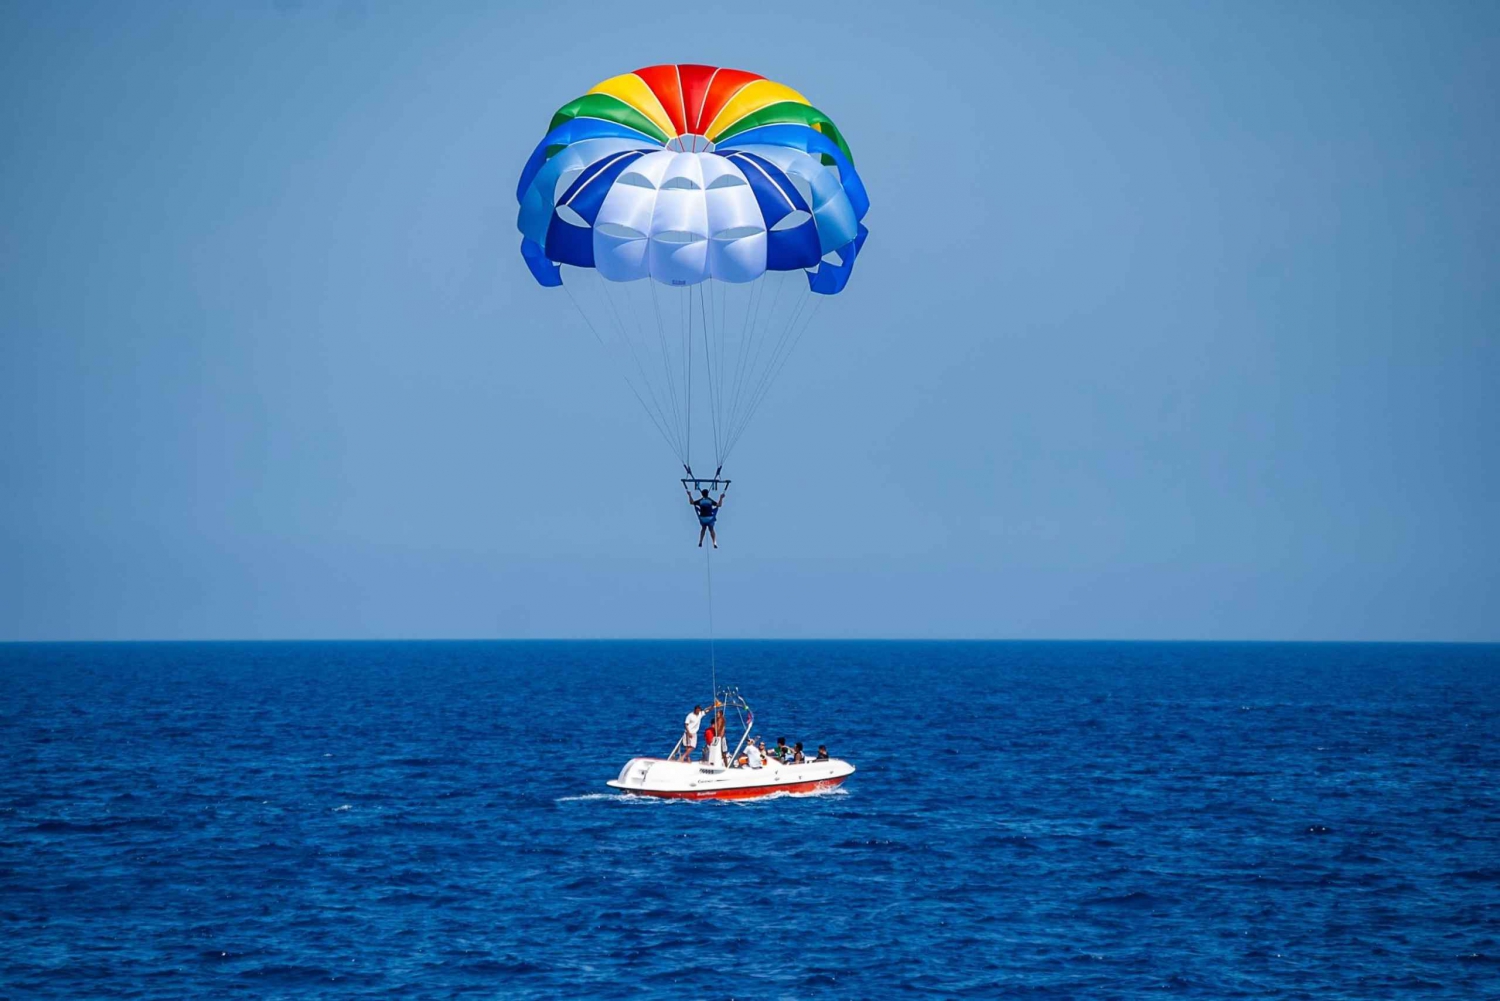 Sharm: Tube Ride with Transfers: Parasailing, Banana Boat & Tube Ride with Transfers